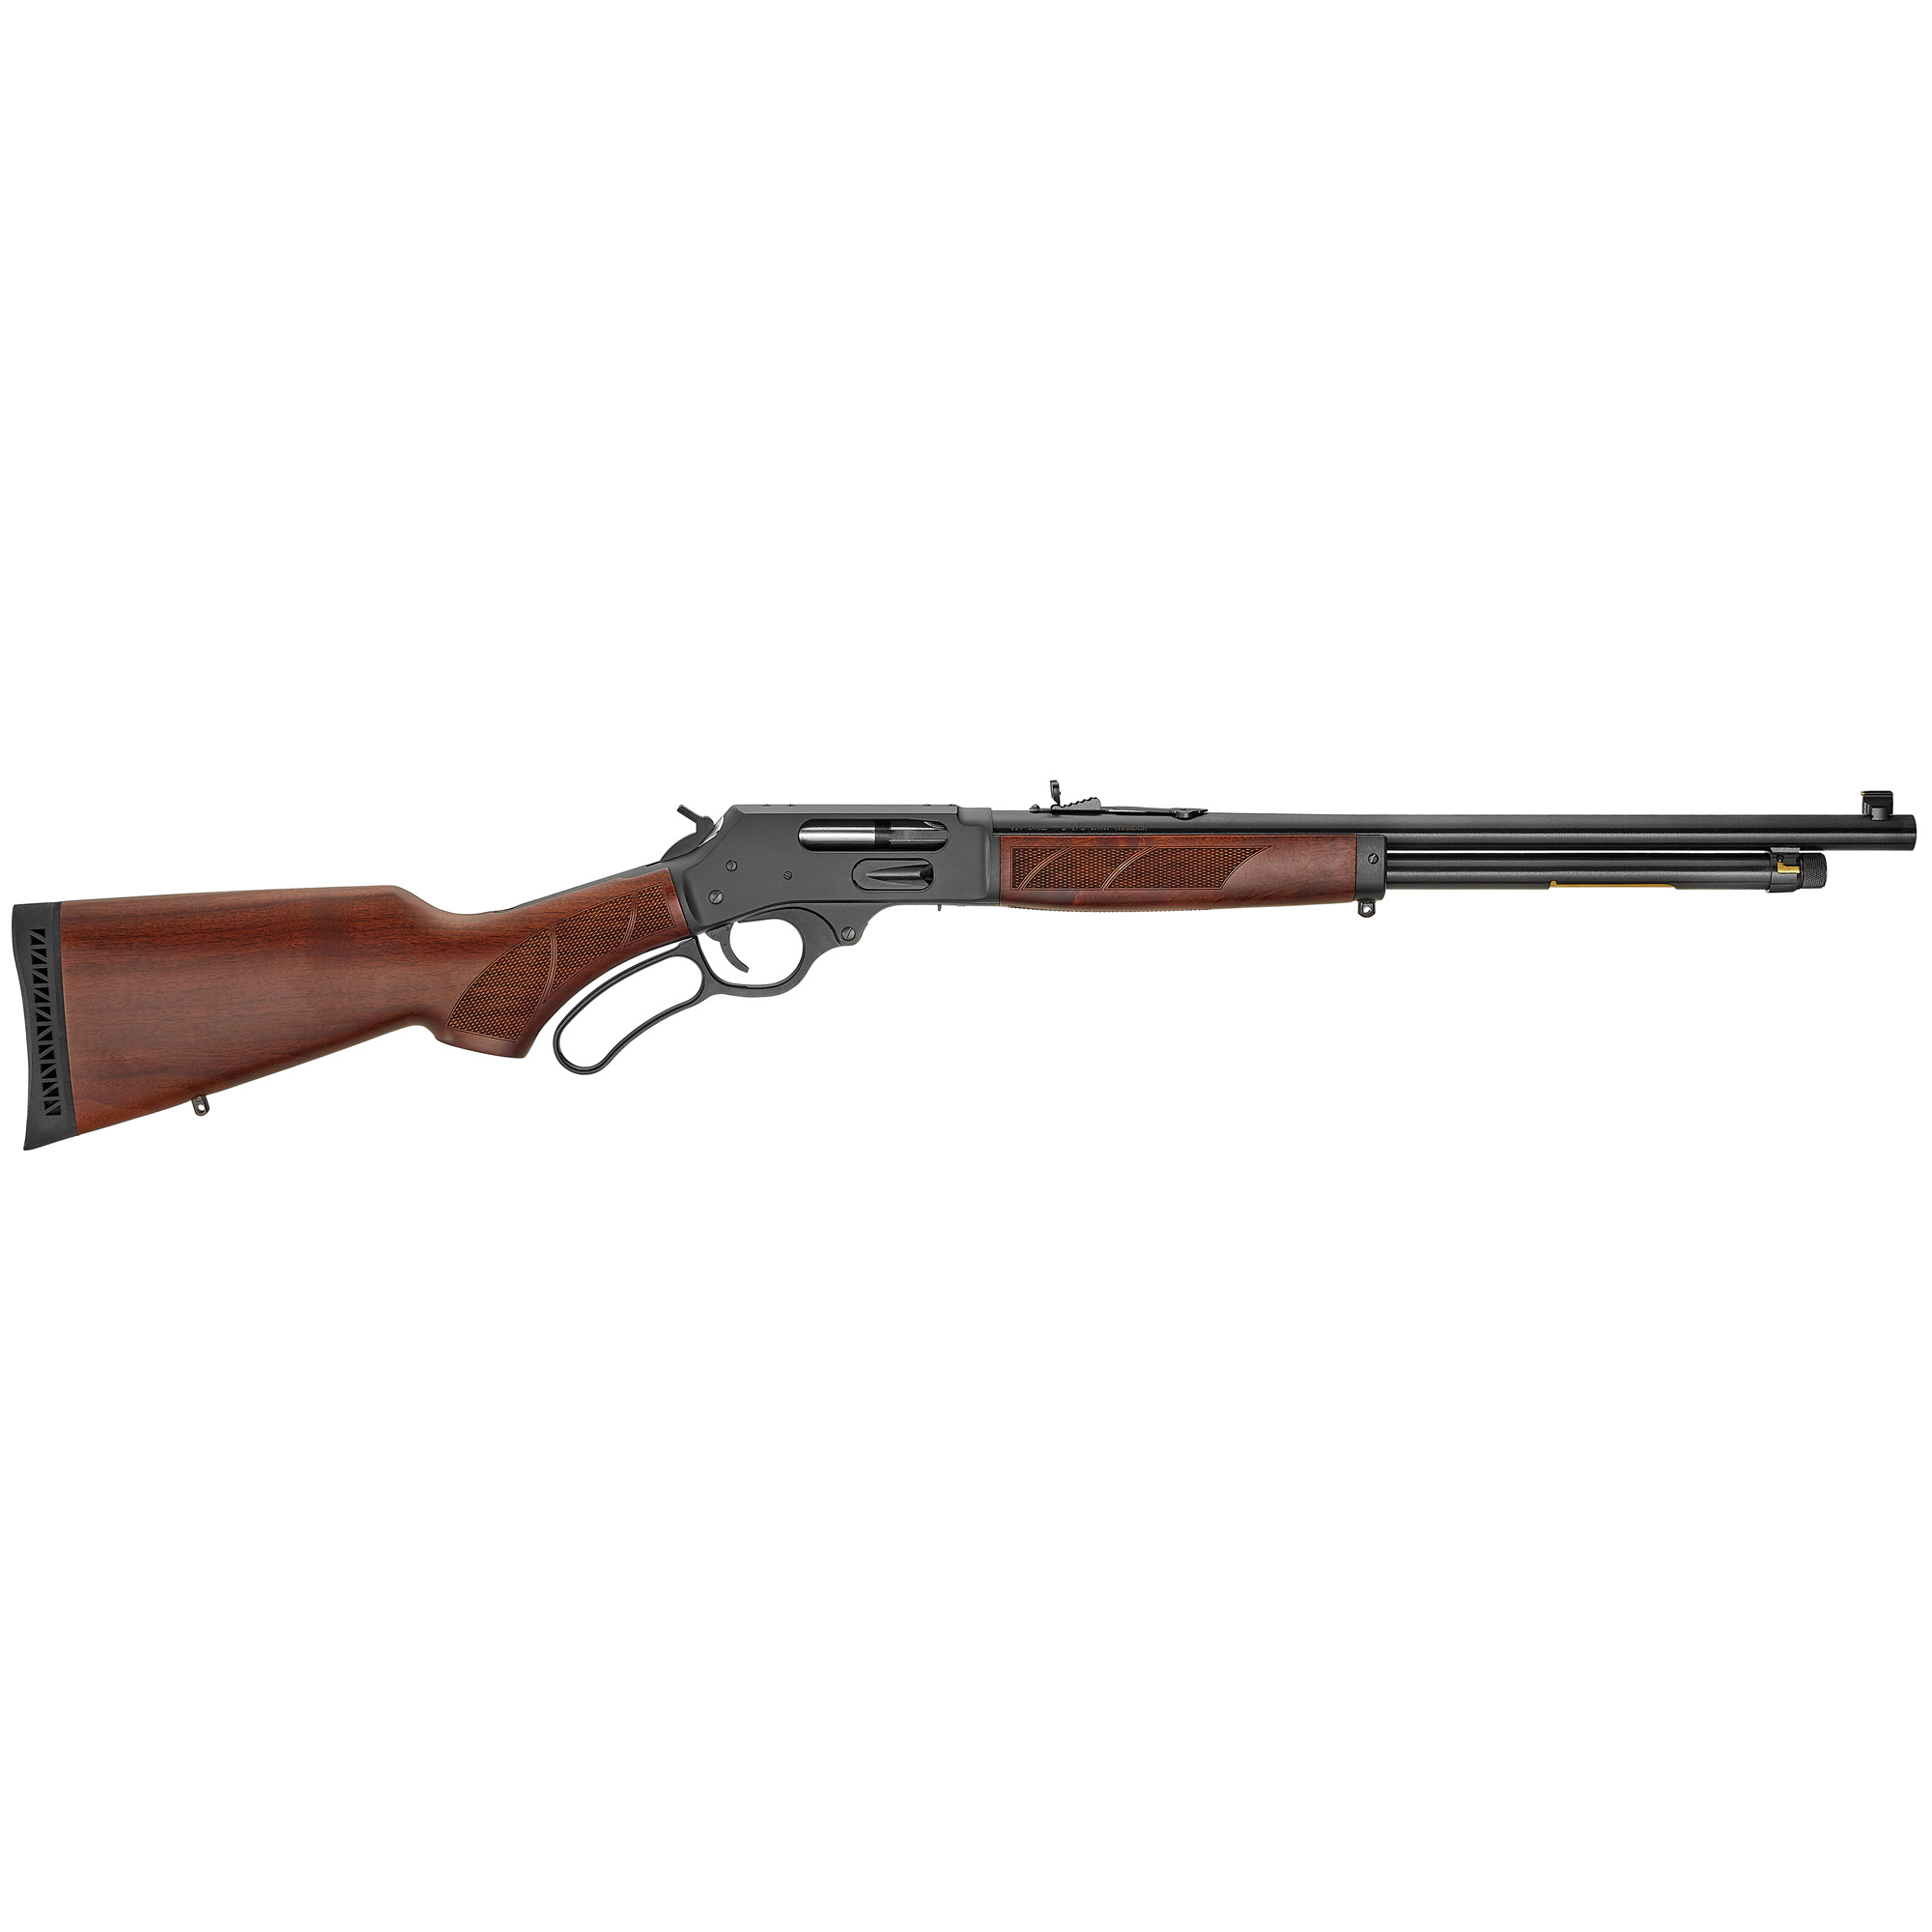 Henry Repeating Arms .410 Bore Side Gate Lever Action Shotgun 19.75" Barrel 5 Round Capacity Blued Steel Receiver American Walnut Stock Blued Finish